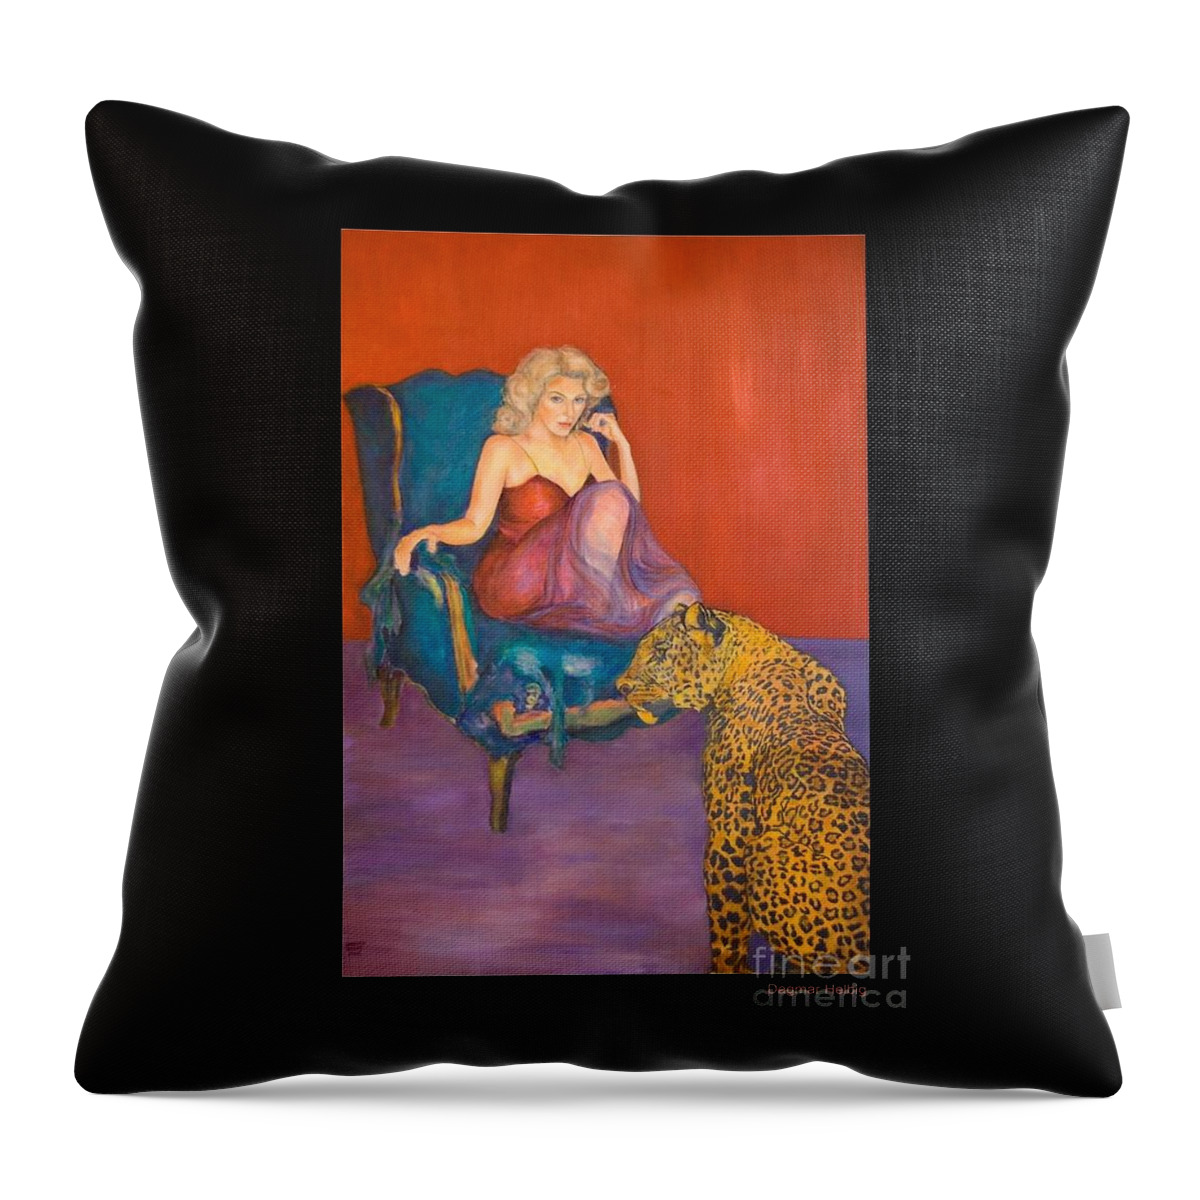 Beauty And Beast Throw Pillow featuring the painting The Beauty And The Beast by Dagmar Helbig